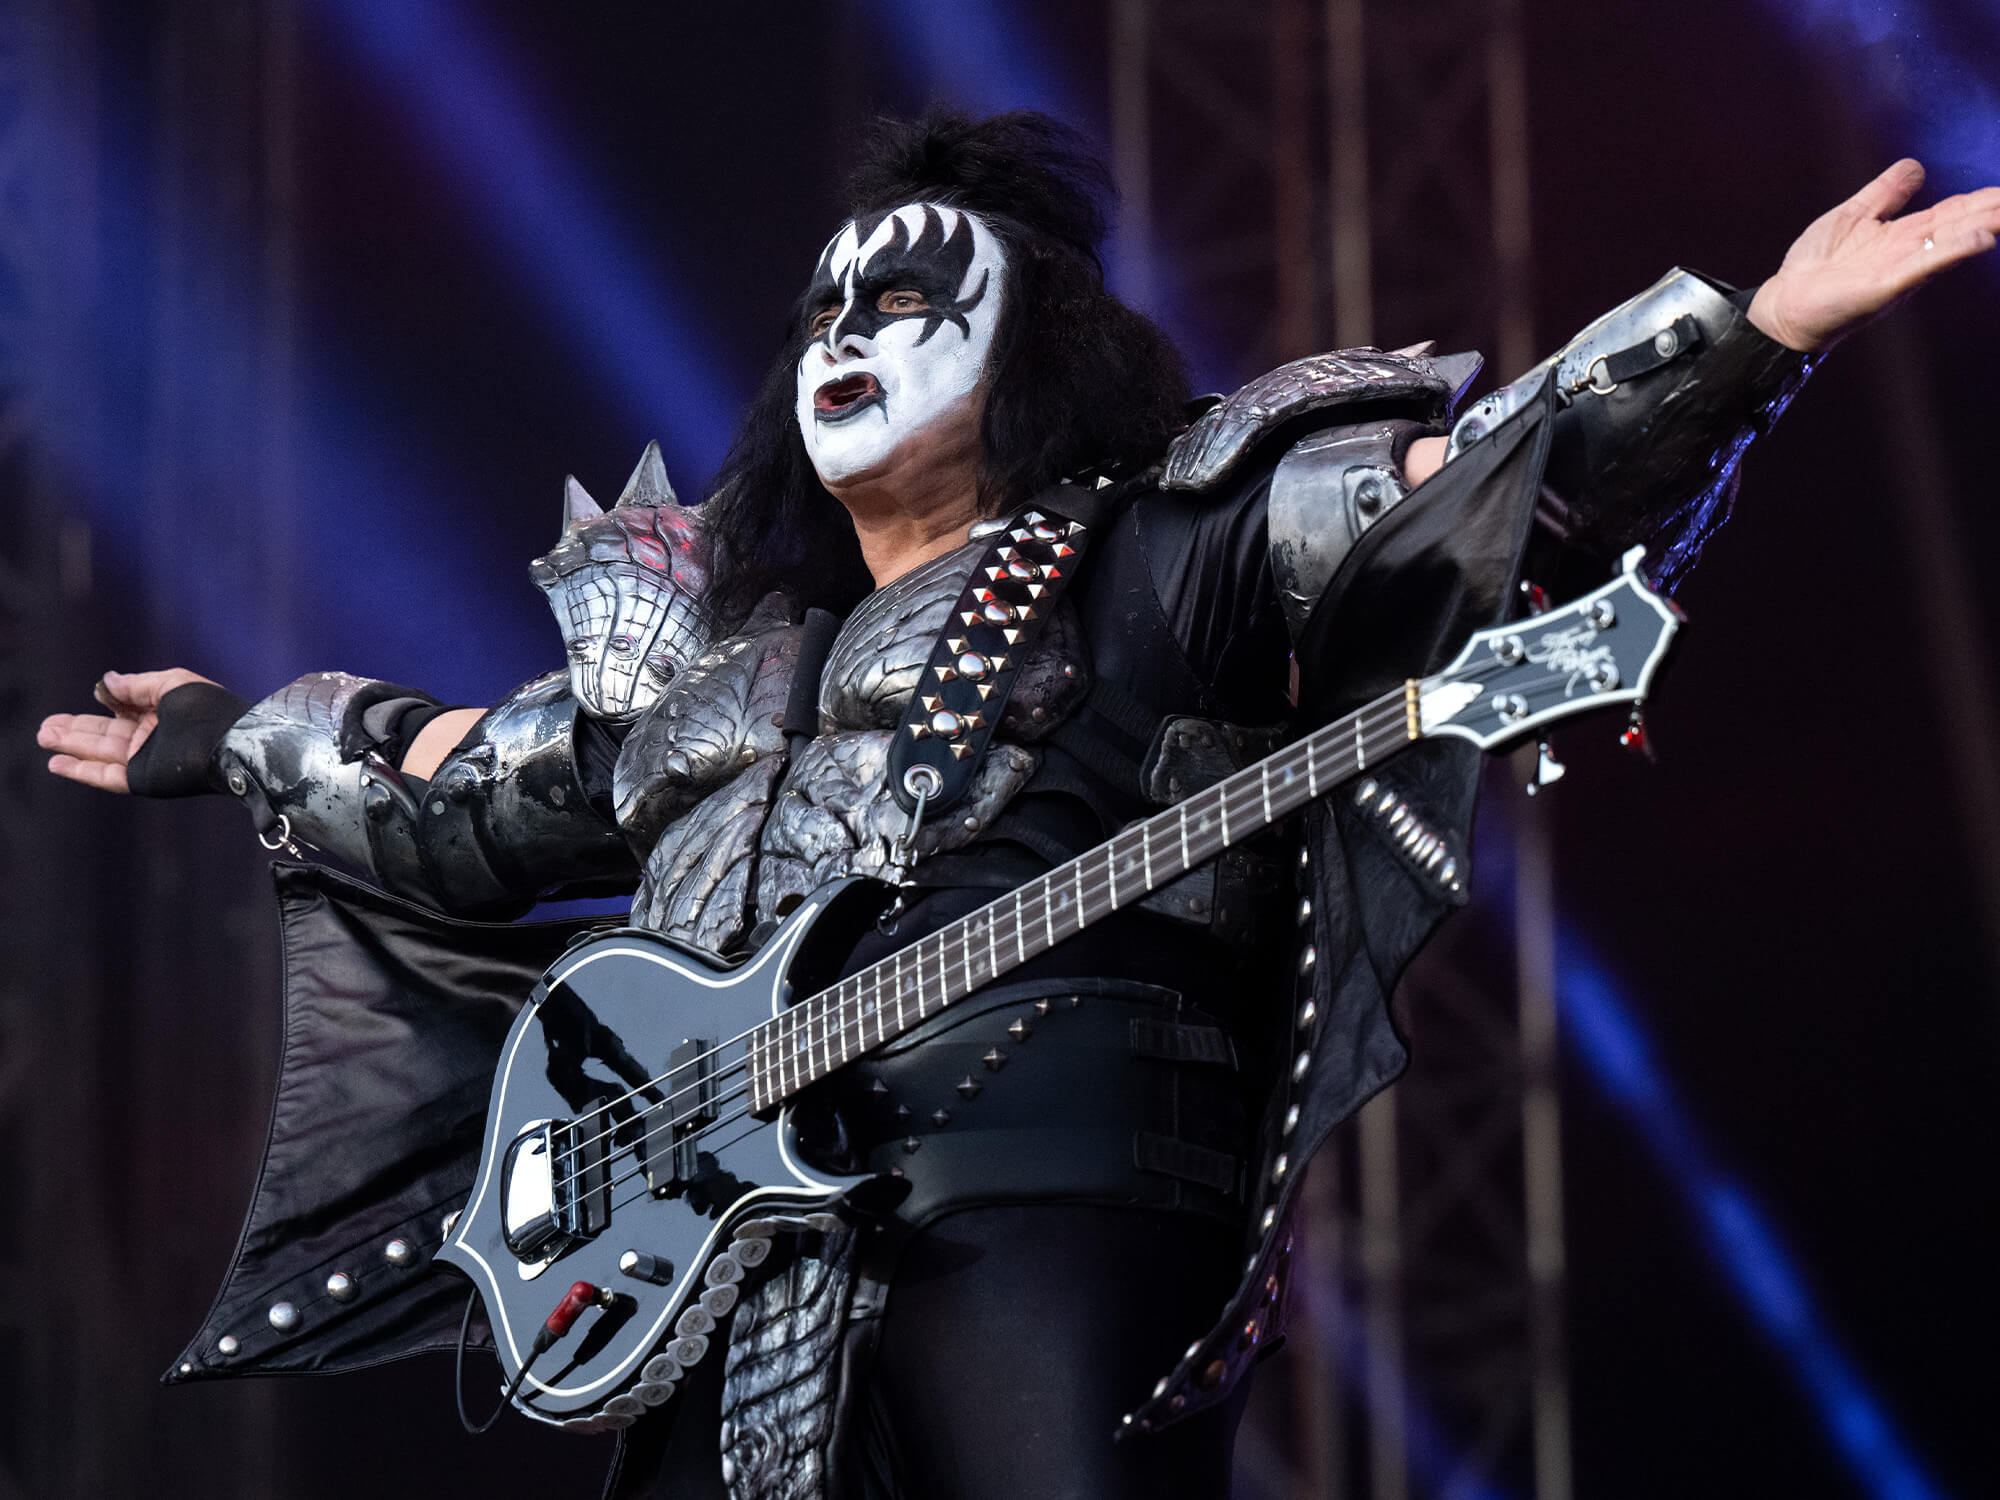 Gene Simmons on stage with both arms out to the side, and his bass guitar at his torso